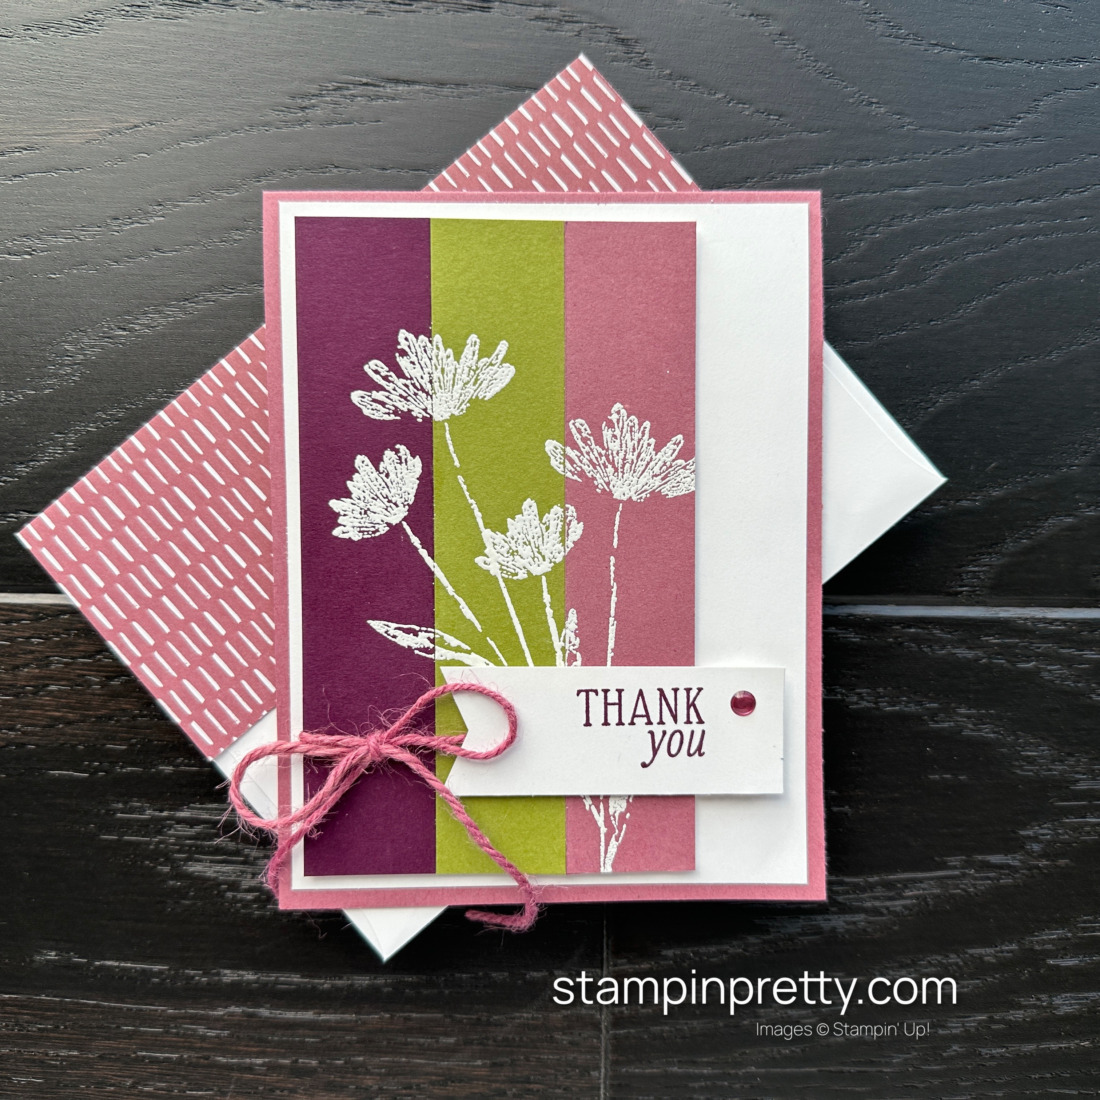 A Thank You Card for the Inked & Tiled Stamp Set and Stampin' Up! Color Combination by Mary Fish, Stampin' Pretty